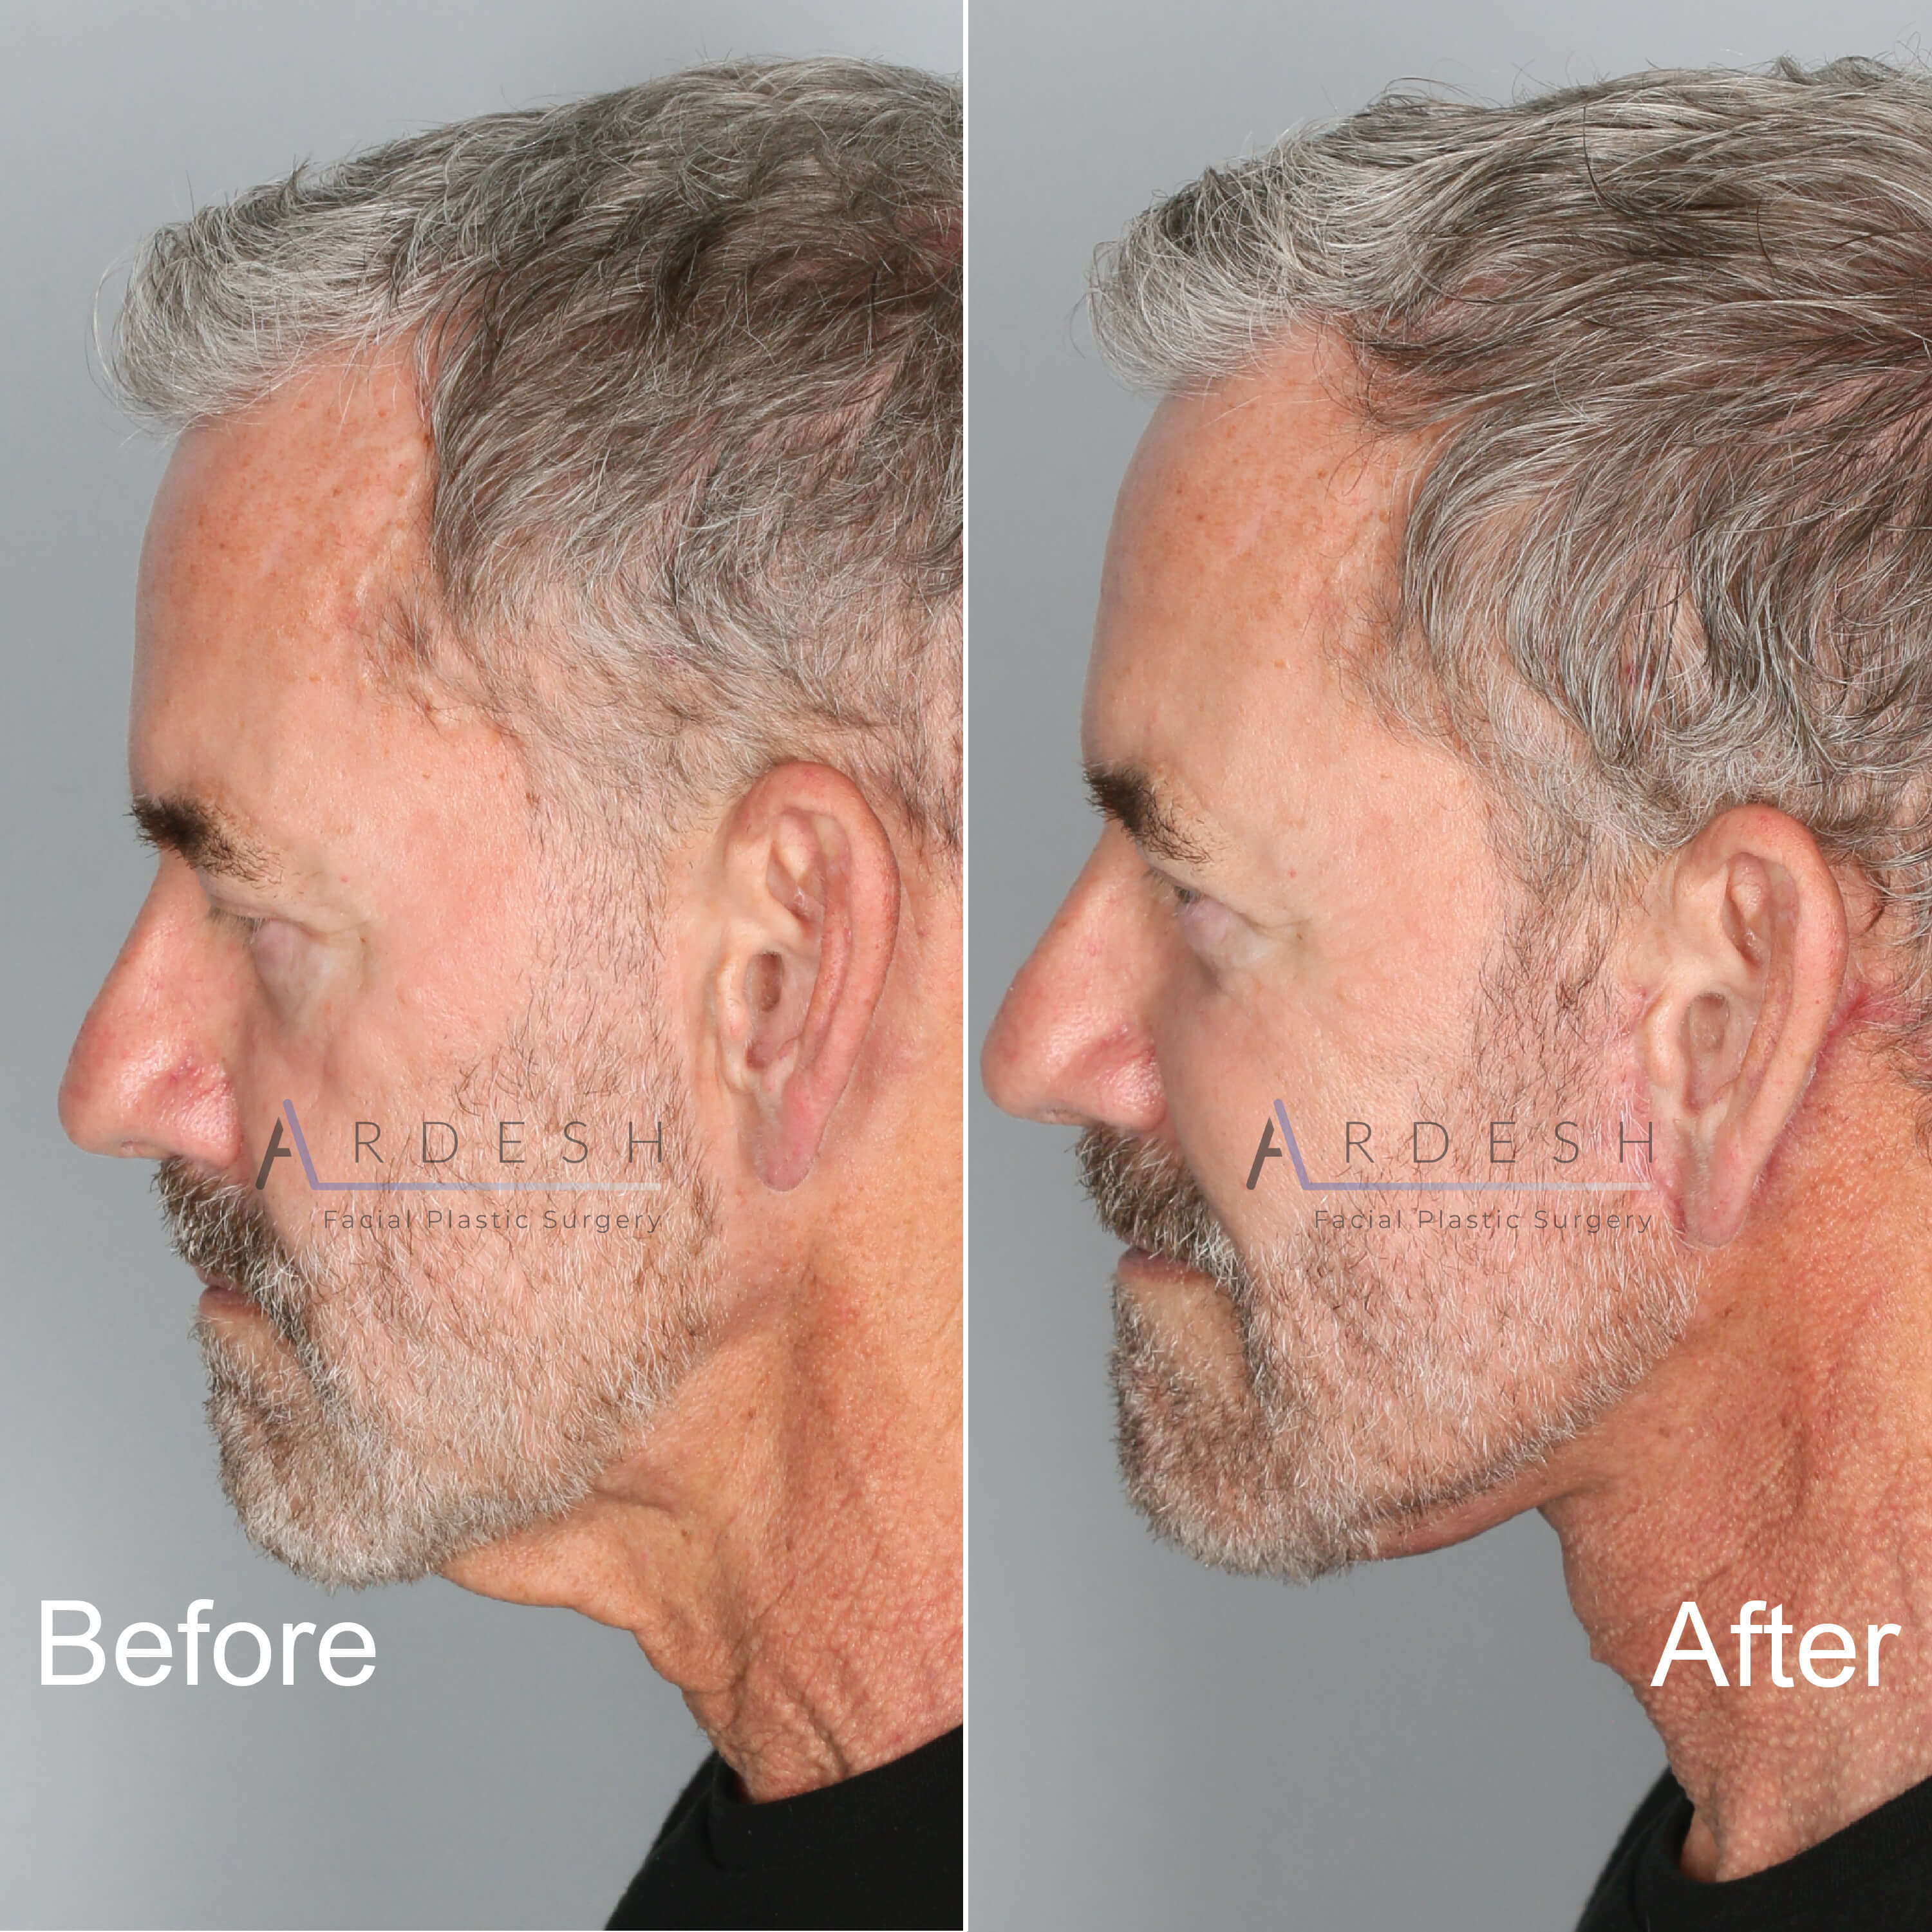 Neck Lift Before and After | Ardesh Facial Plastic Surgery